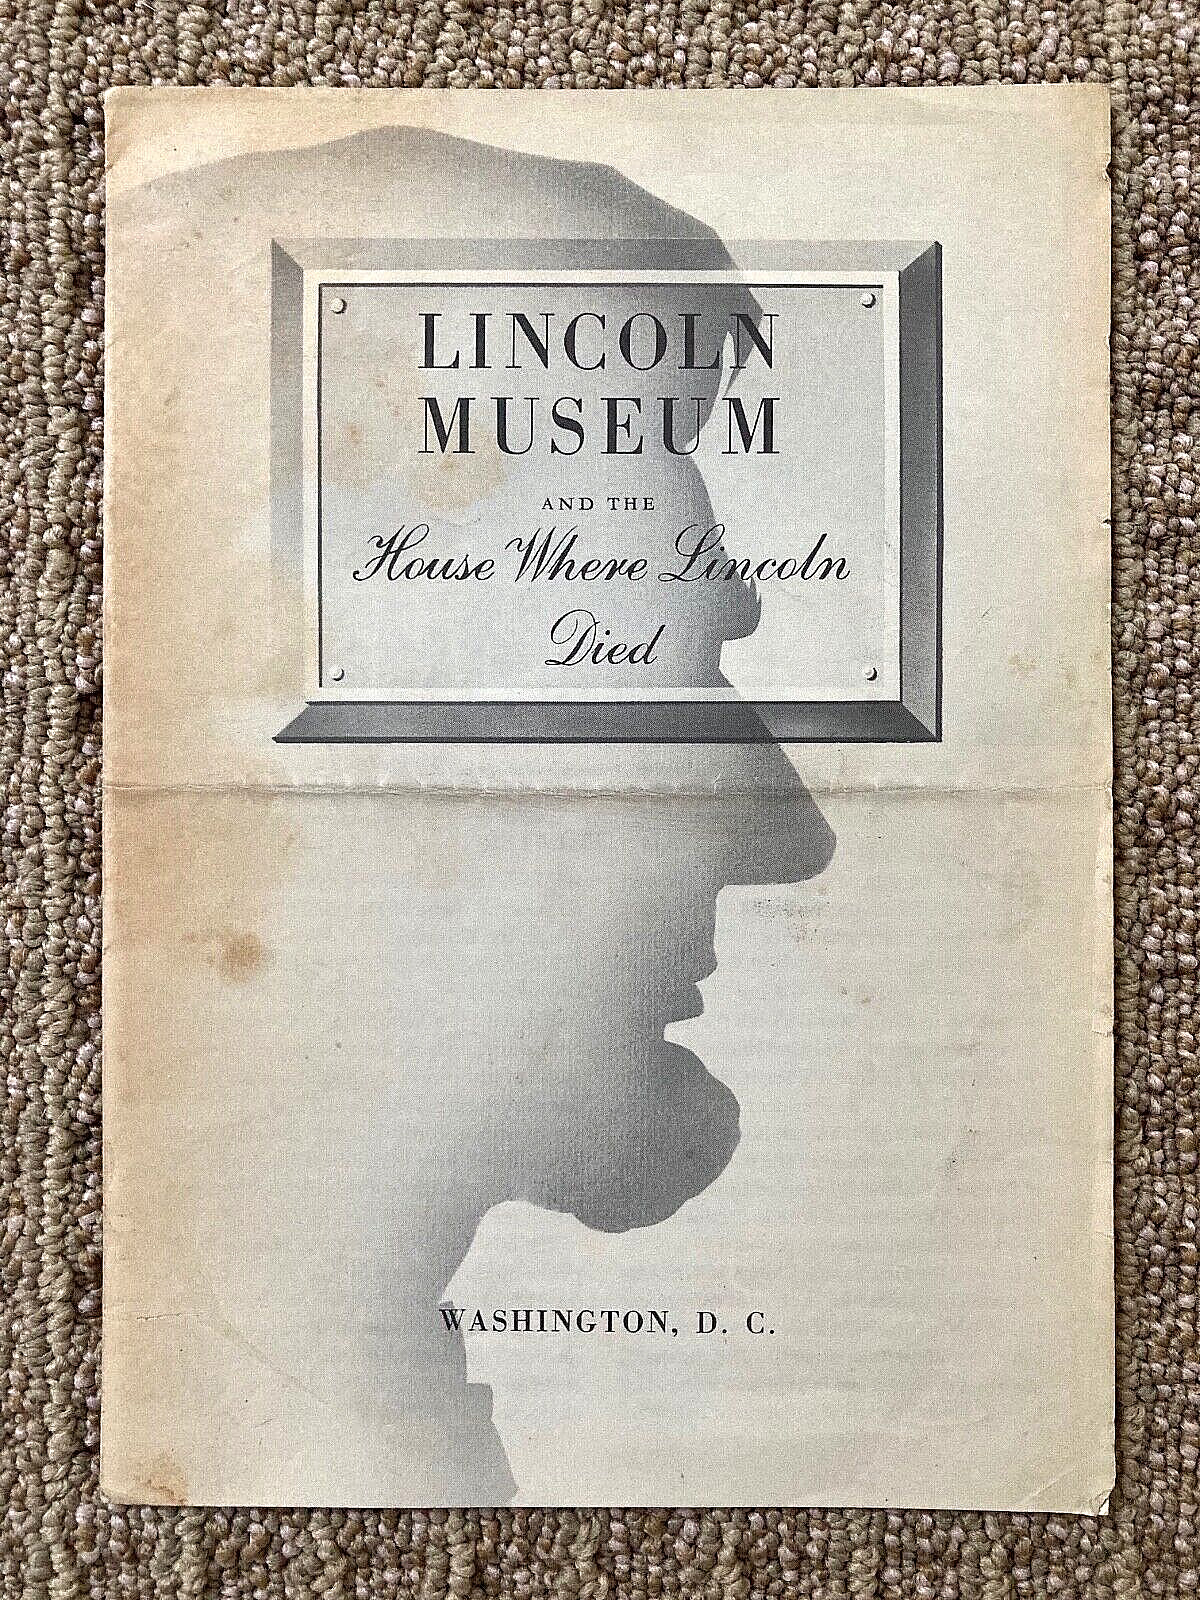 ORIGINAL  FLYER from THE ACTUAL HOUSE WHERE LINCOLN DIED in WASHINGTON D.C. 1958